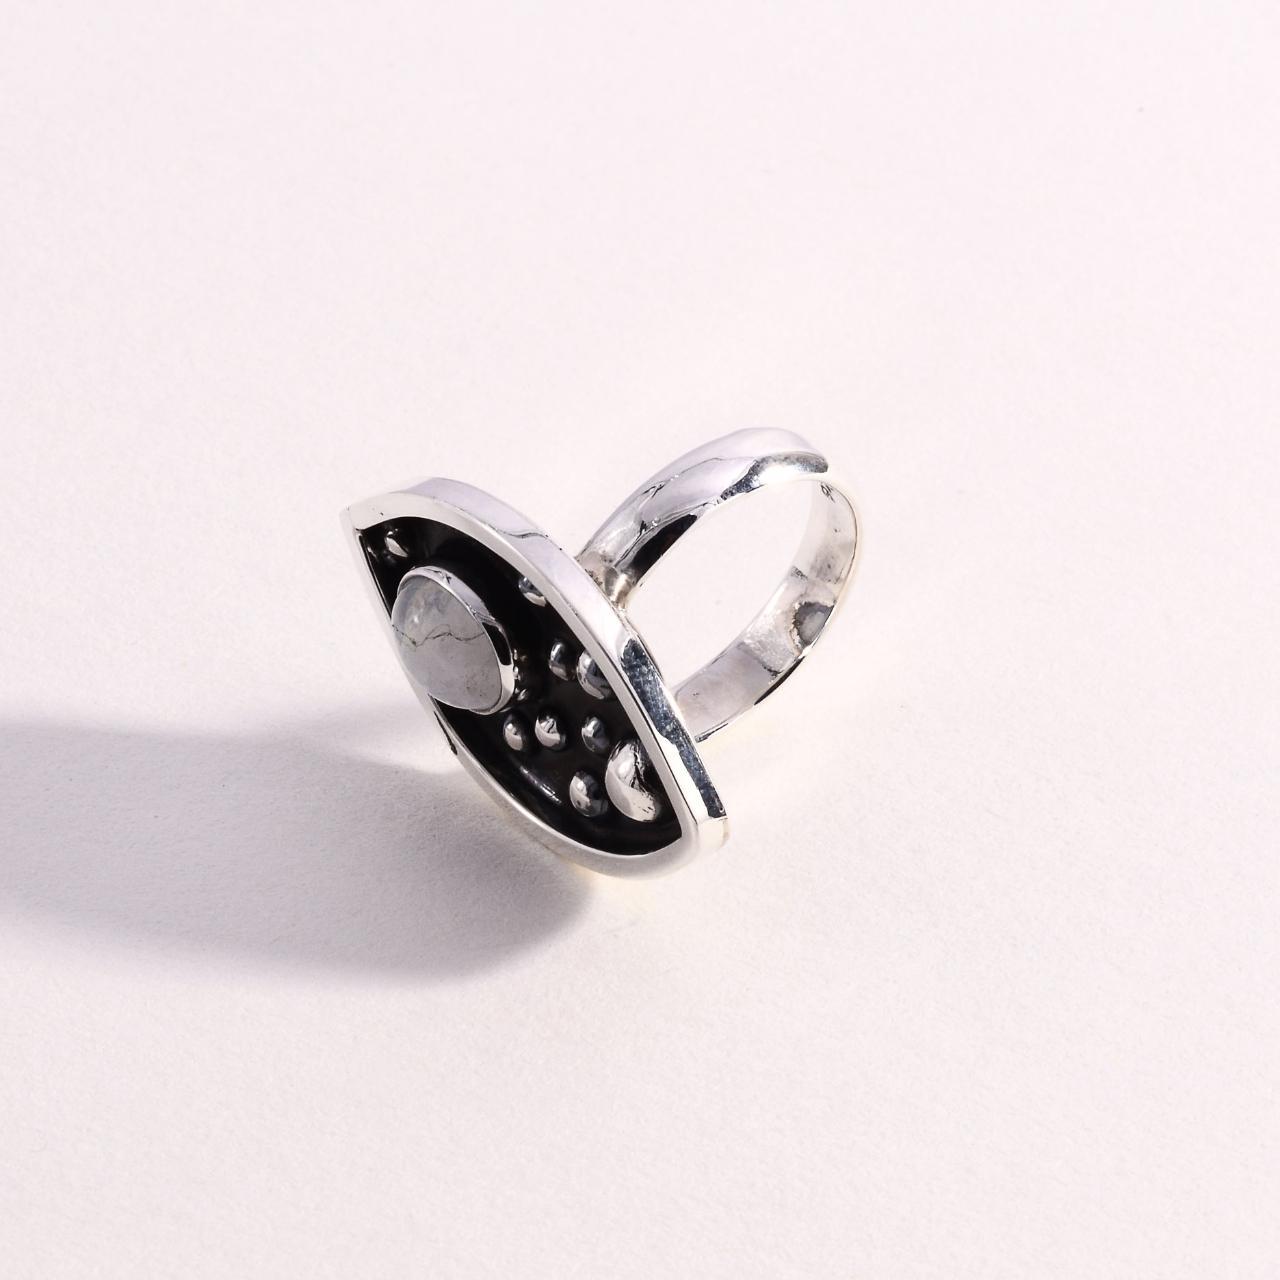 Product Image 4 - Sterling 925 Moonstone Ring

Sterling Silver

Size